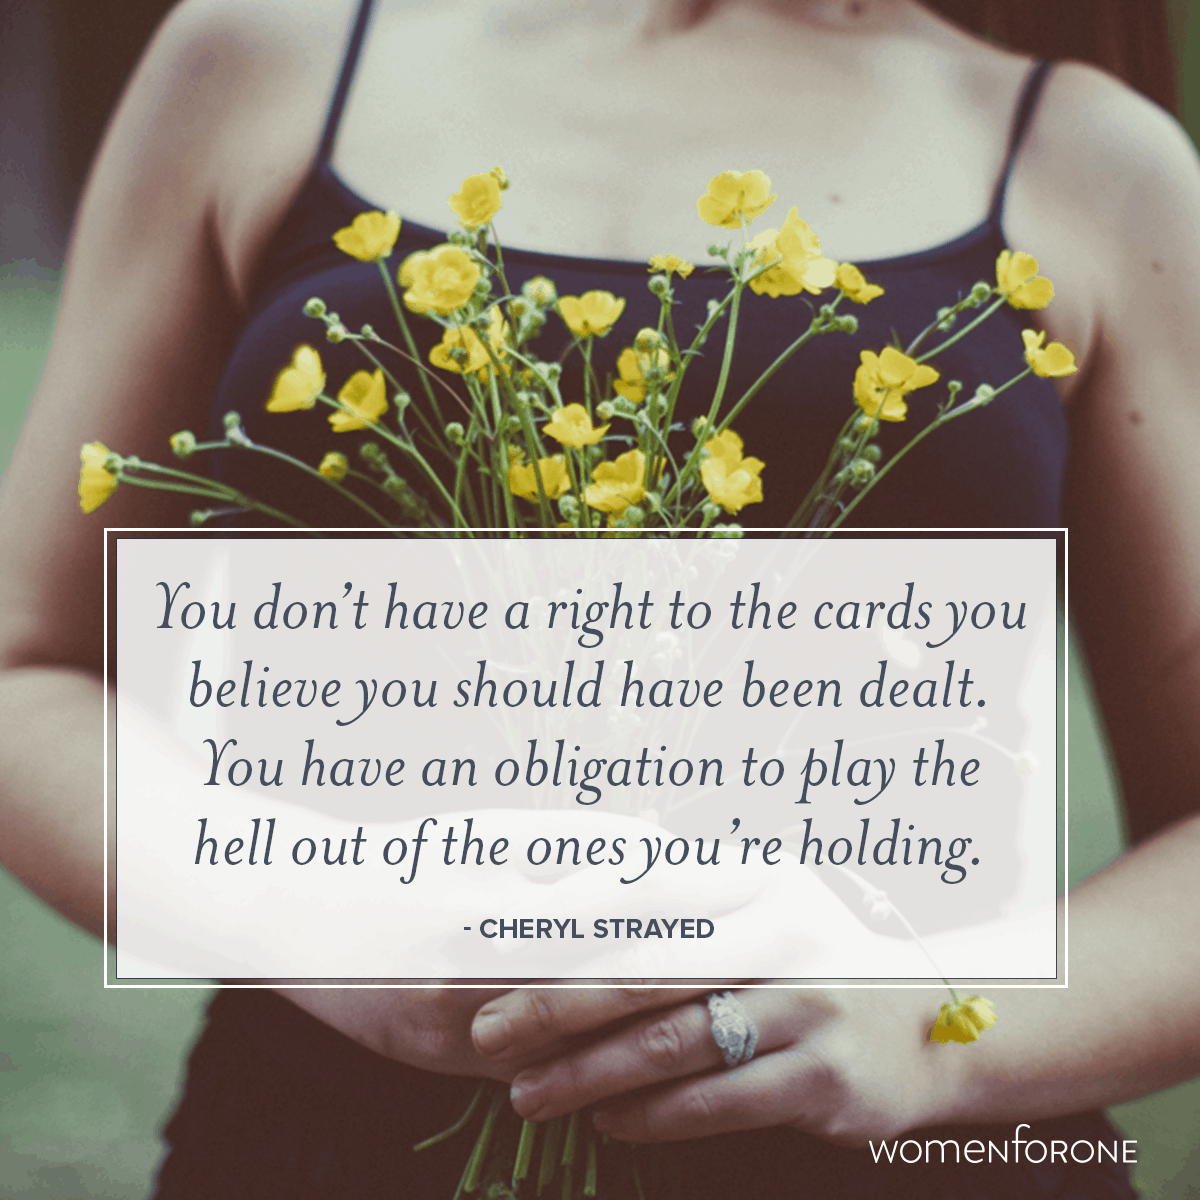 You don’t have a right to the cards you believe you should have been dealt. You have an obligation to play the hell out of the ones you’re holding. - Cheryl Strayed